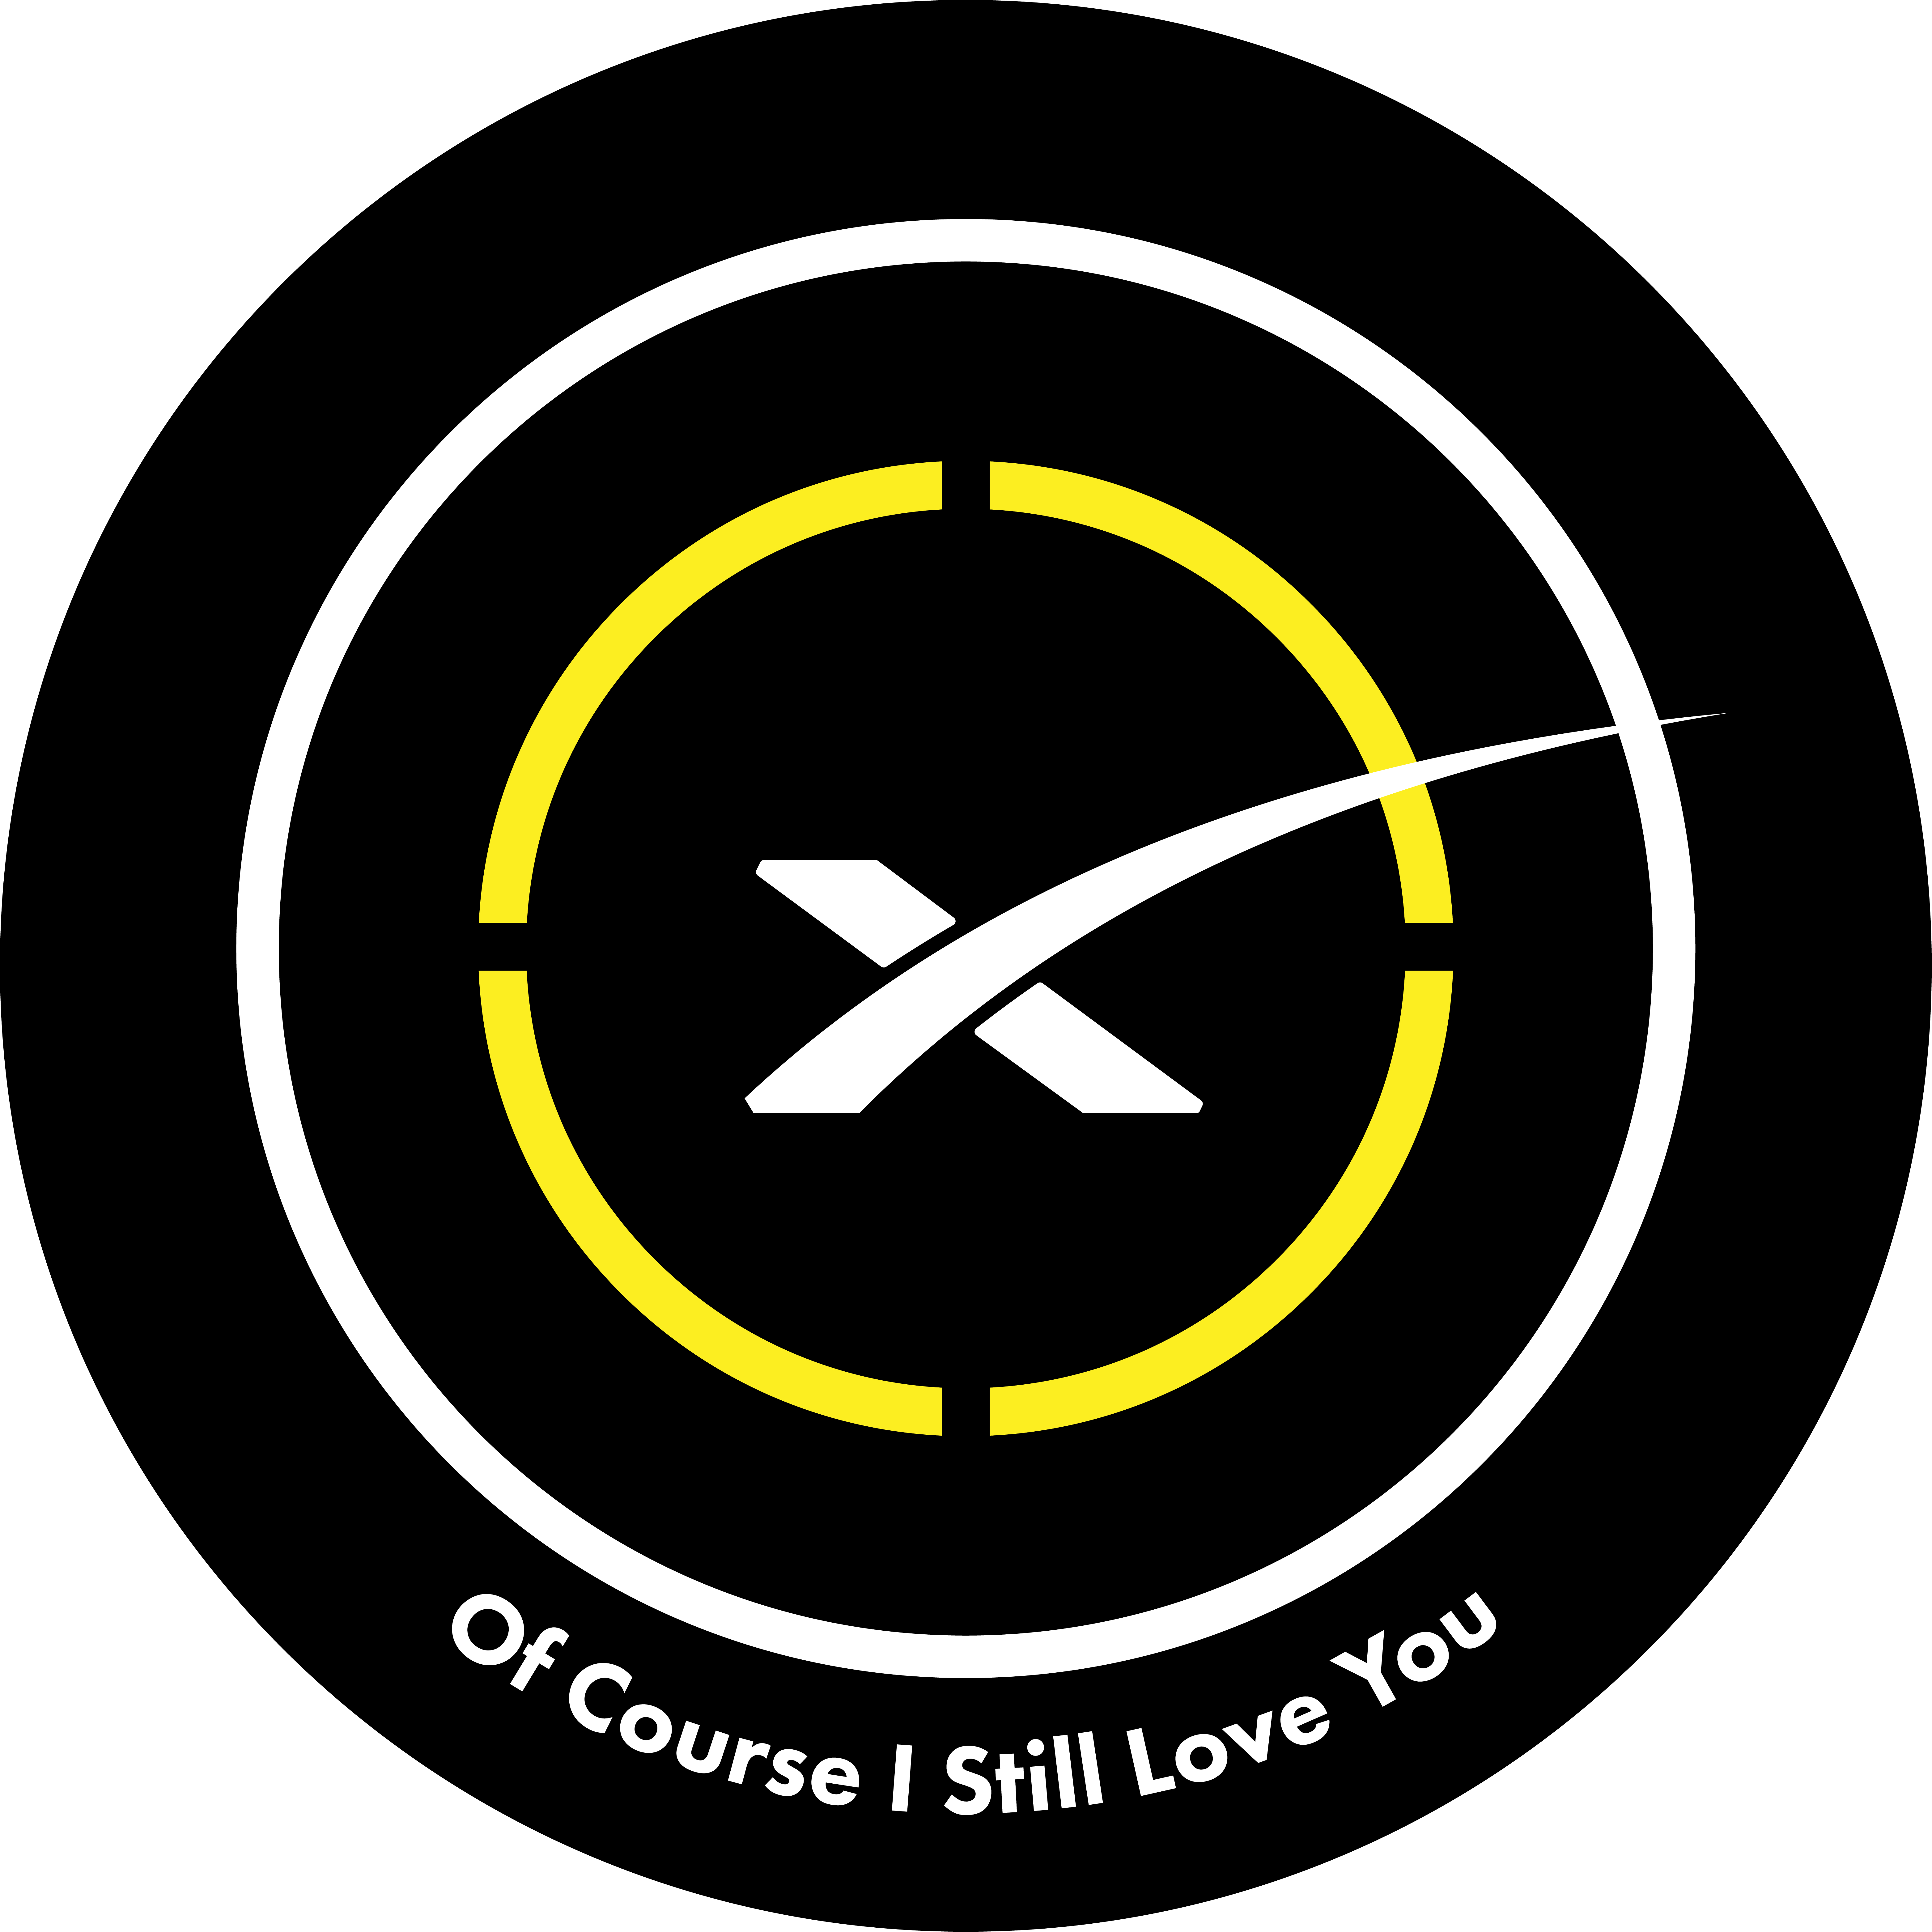 Of course i still Love you SPACEX. Of course i still Love you. Of course i still Love you платформа. SPACEX of course i still Love.